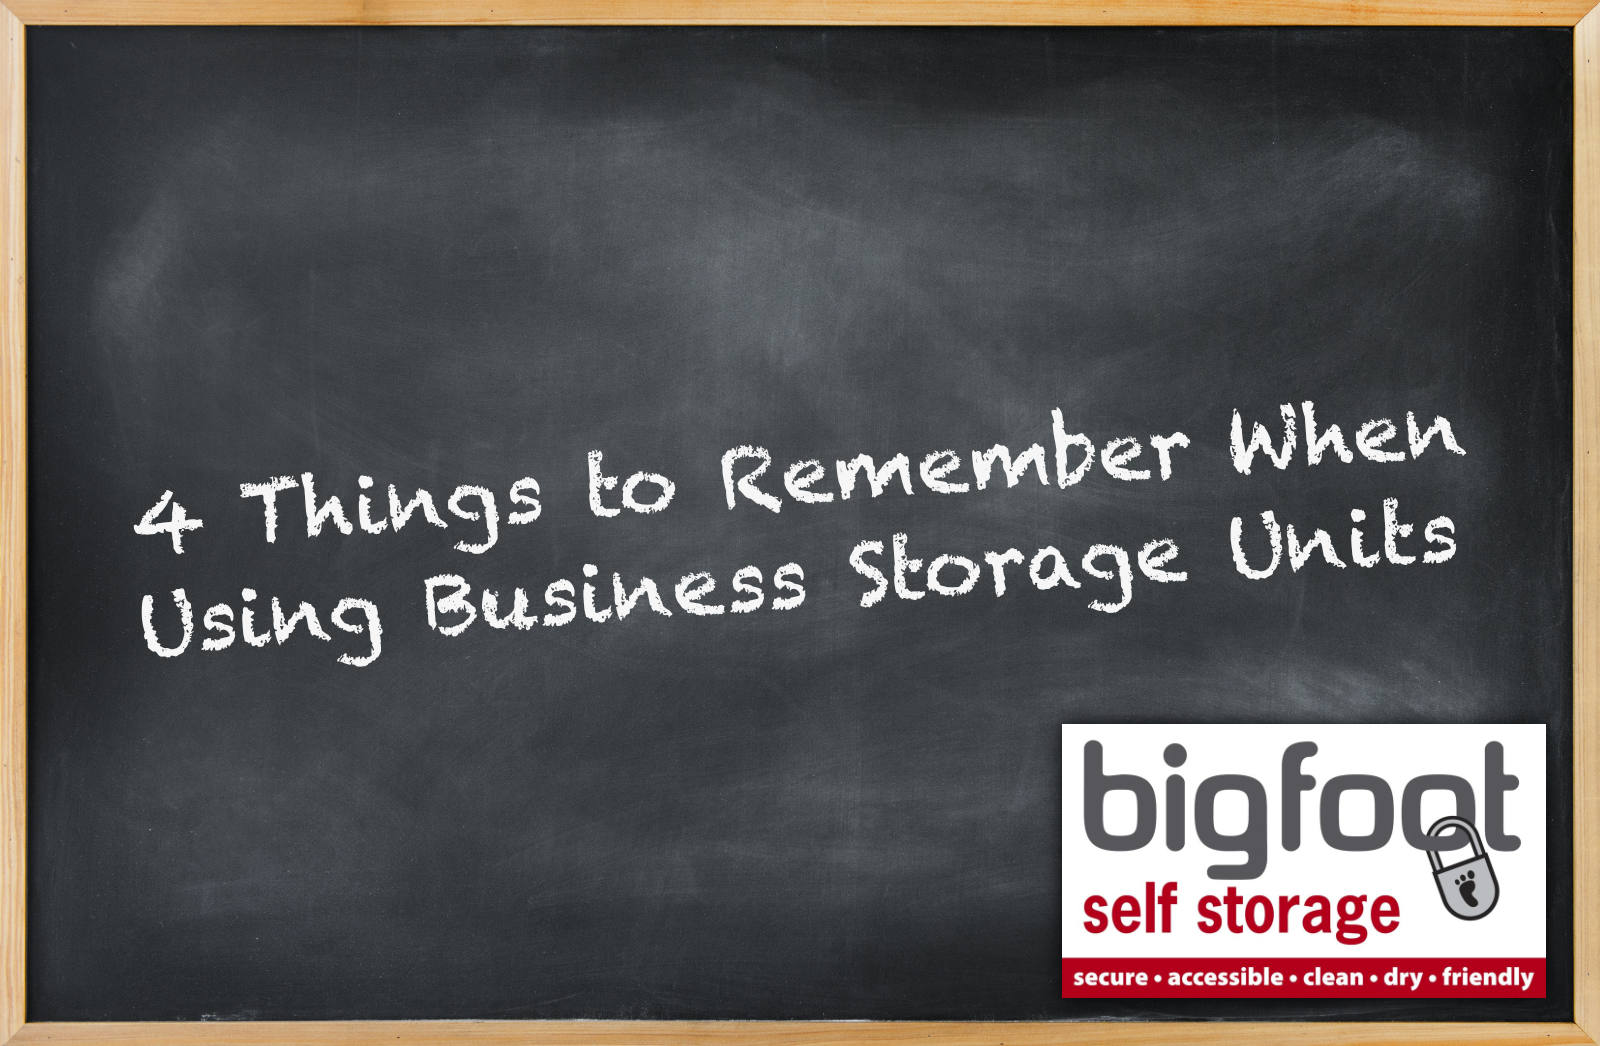 Considerations for using business storage units